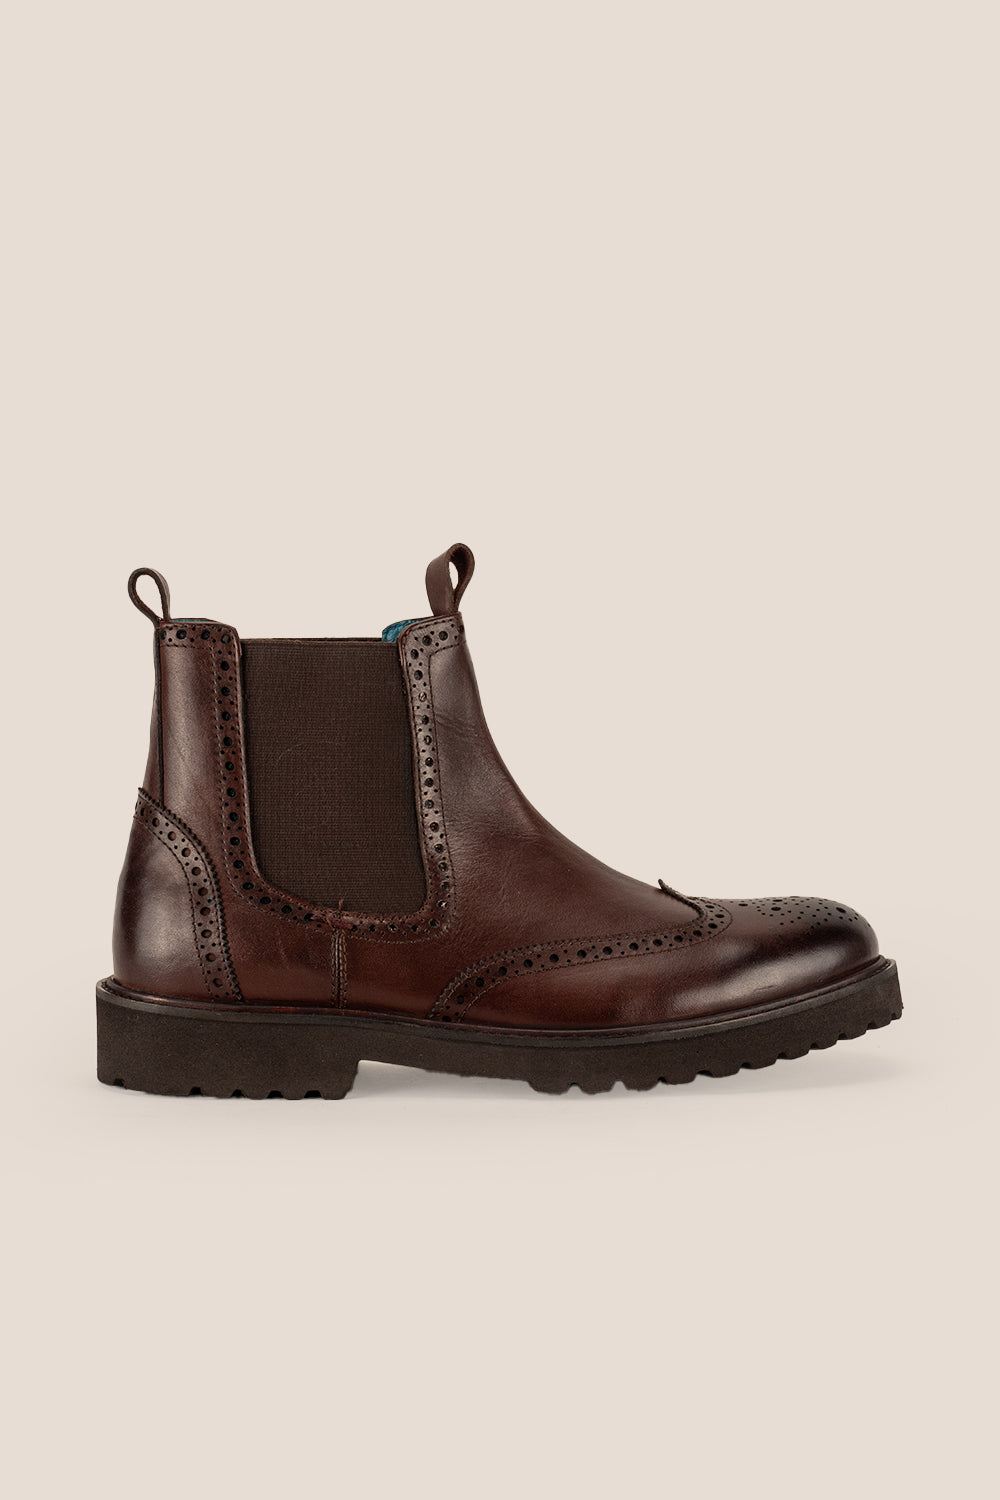 Grant Brown Leather Brogue Chelsea Boots | Oswin Hyde